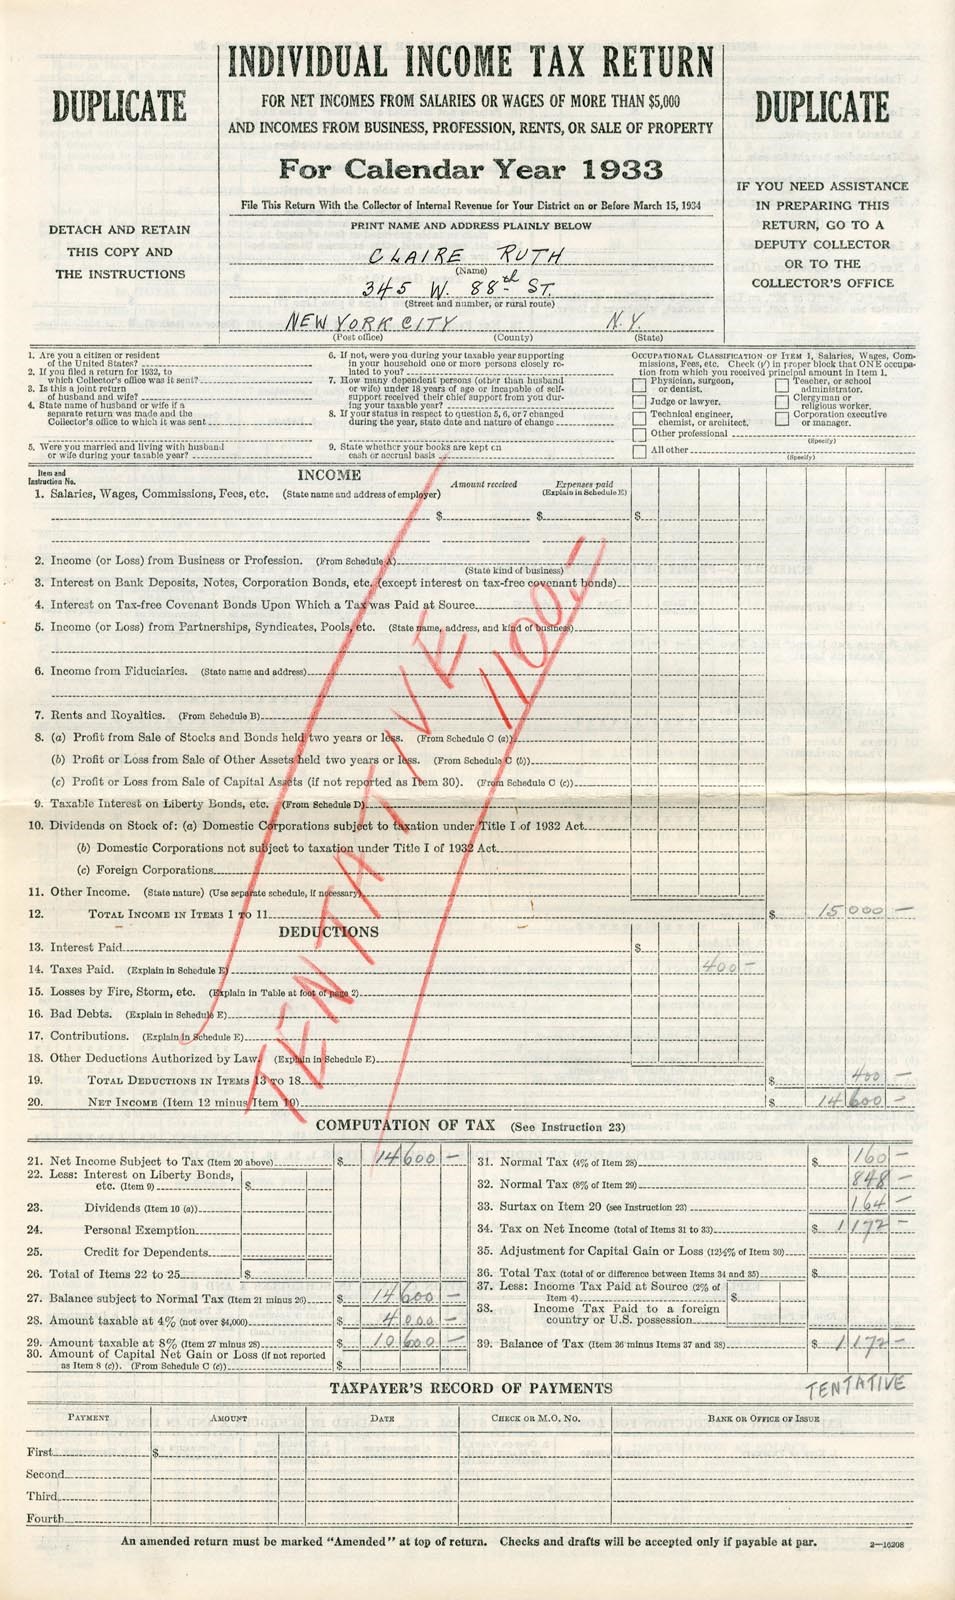 Ruth and Gehrig - 1933 Babe Ruth's Wife Claire Ruth "Tentative" Income Tax Return